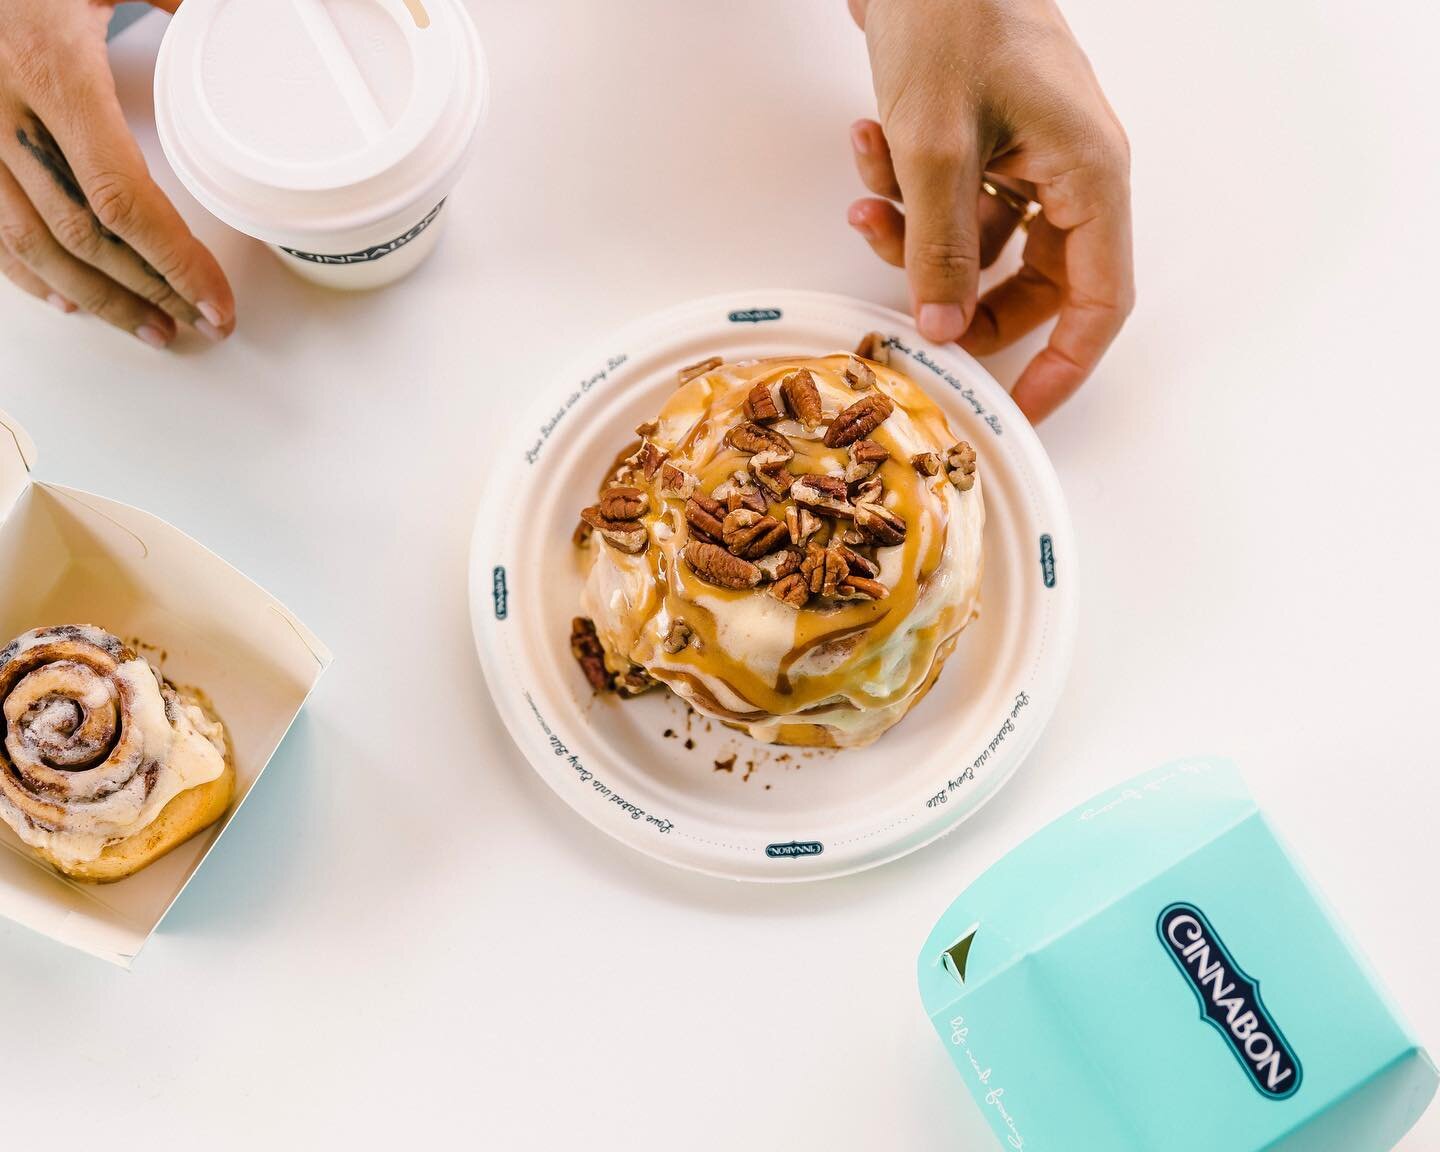 Cinnabon&rsquo;s first Sydney store opened over the weekend - we were lucky enough to capture some images for Broadsheet 📷 
.
.
.
#broadsheet #cinnabon #food #foodporn #foodphotography #canonphotography #content